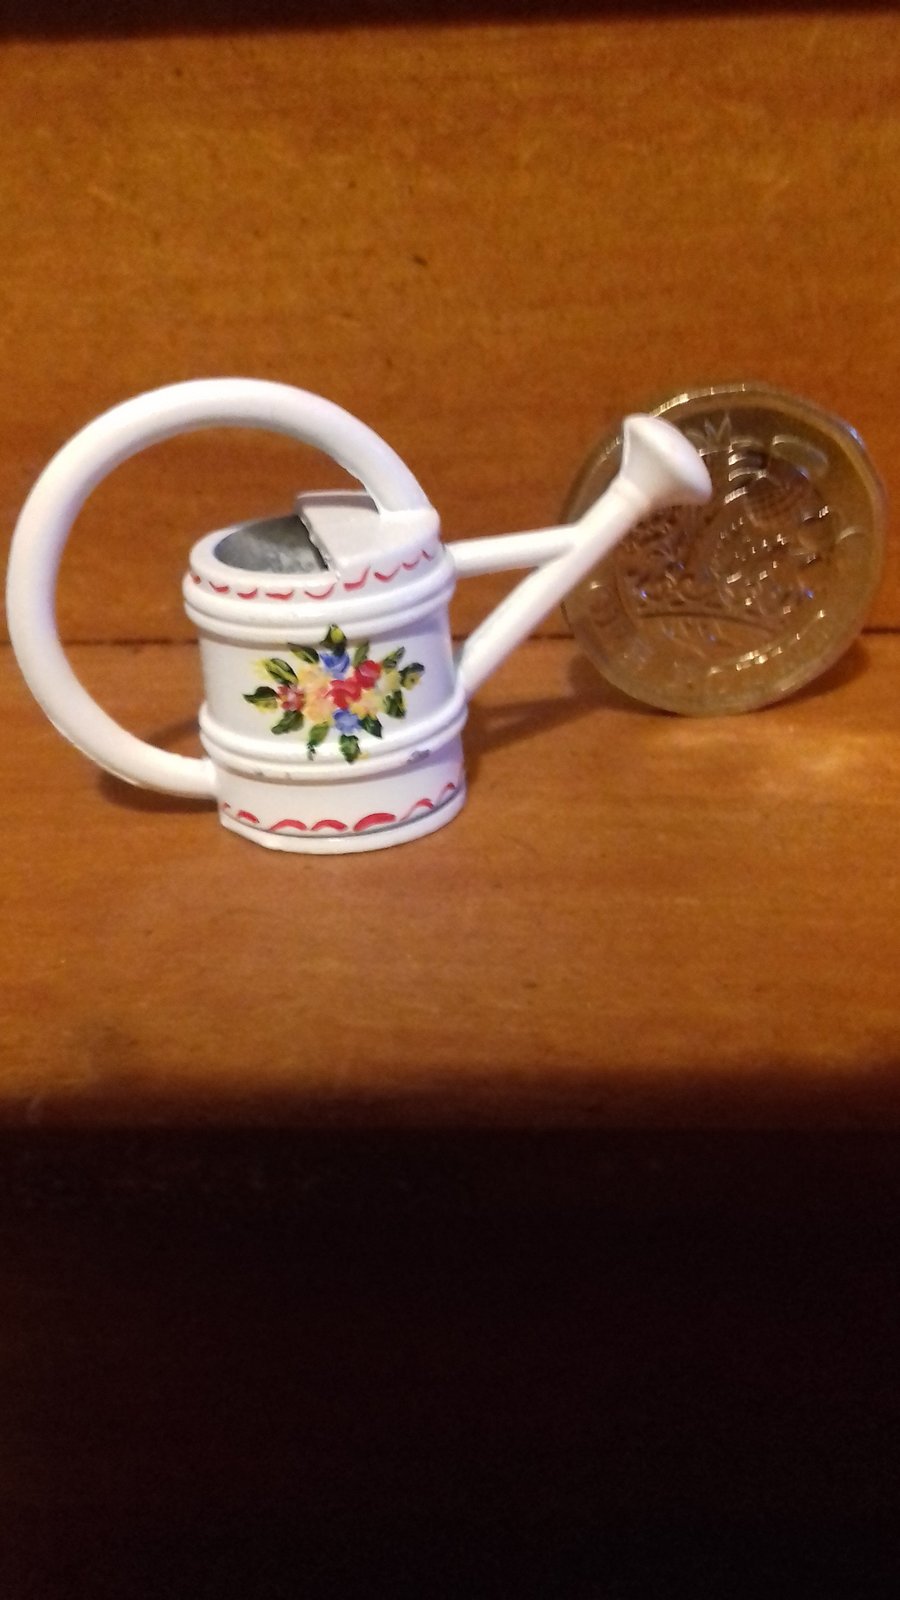 12th Scale Canalware Watering Can